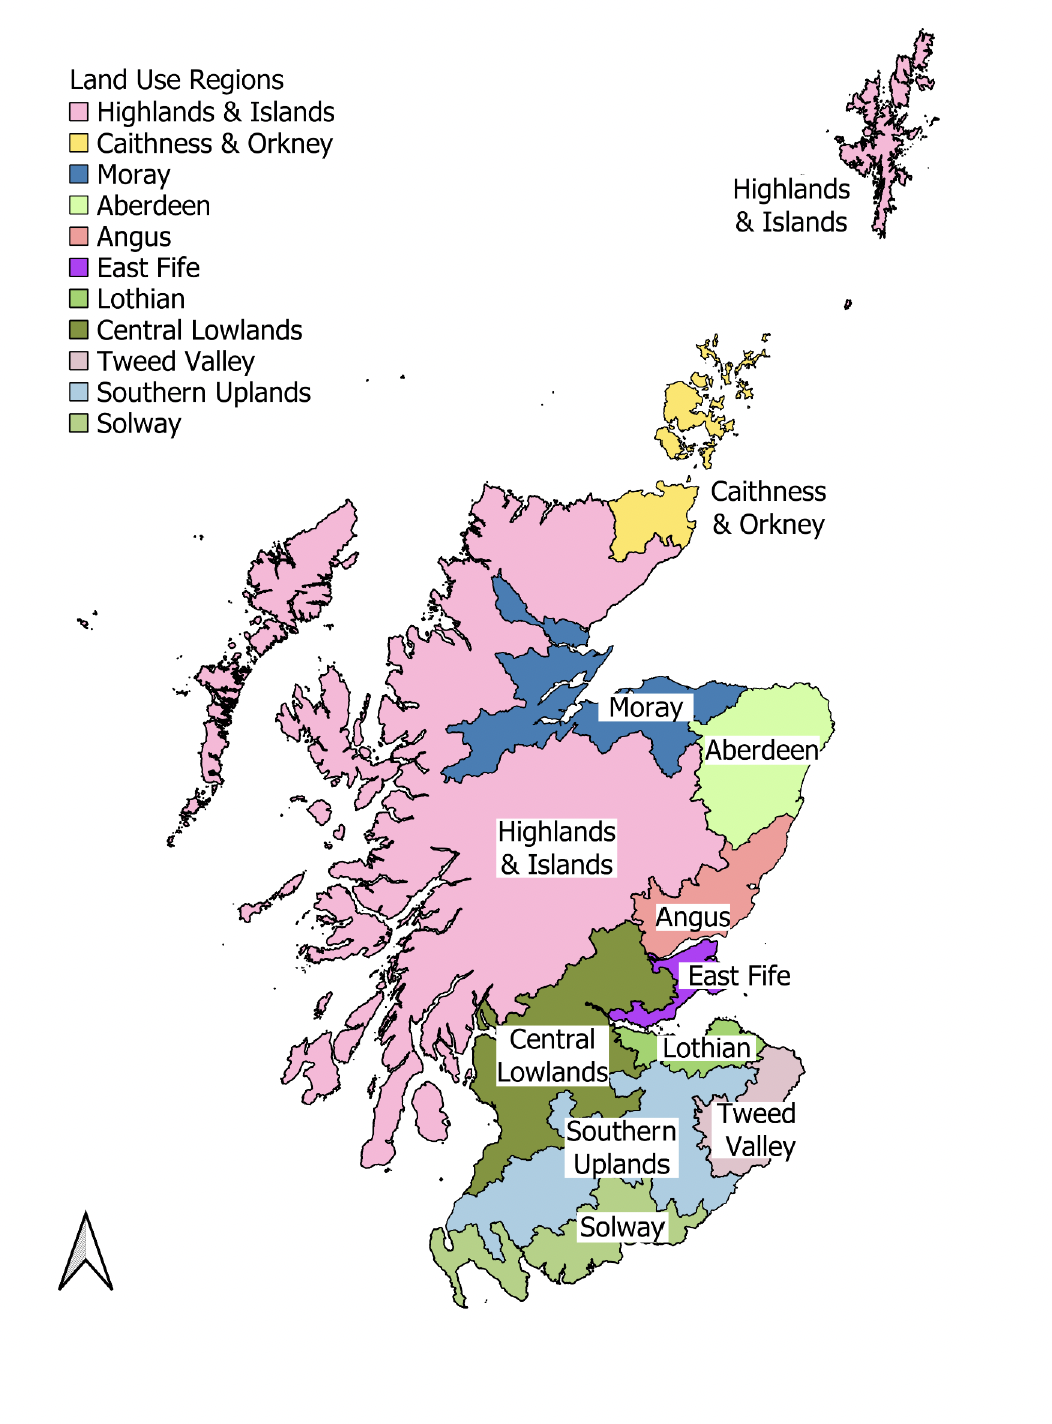 Map of Scotland showing locations of the eleven land use regions sampled.  Highlands and Islands, Caithness and Orkney, Moray, Aberdeen, Angus, East Fife, Lothian, Central Lowlands, Tweed Valey, Southern Uplands and Solway.